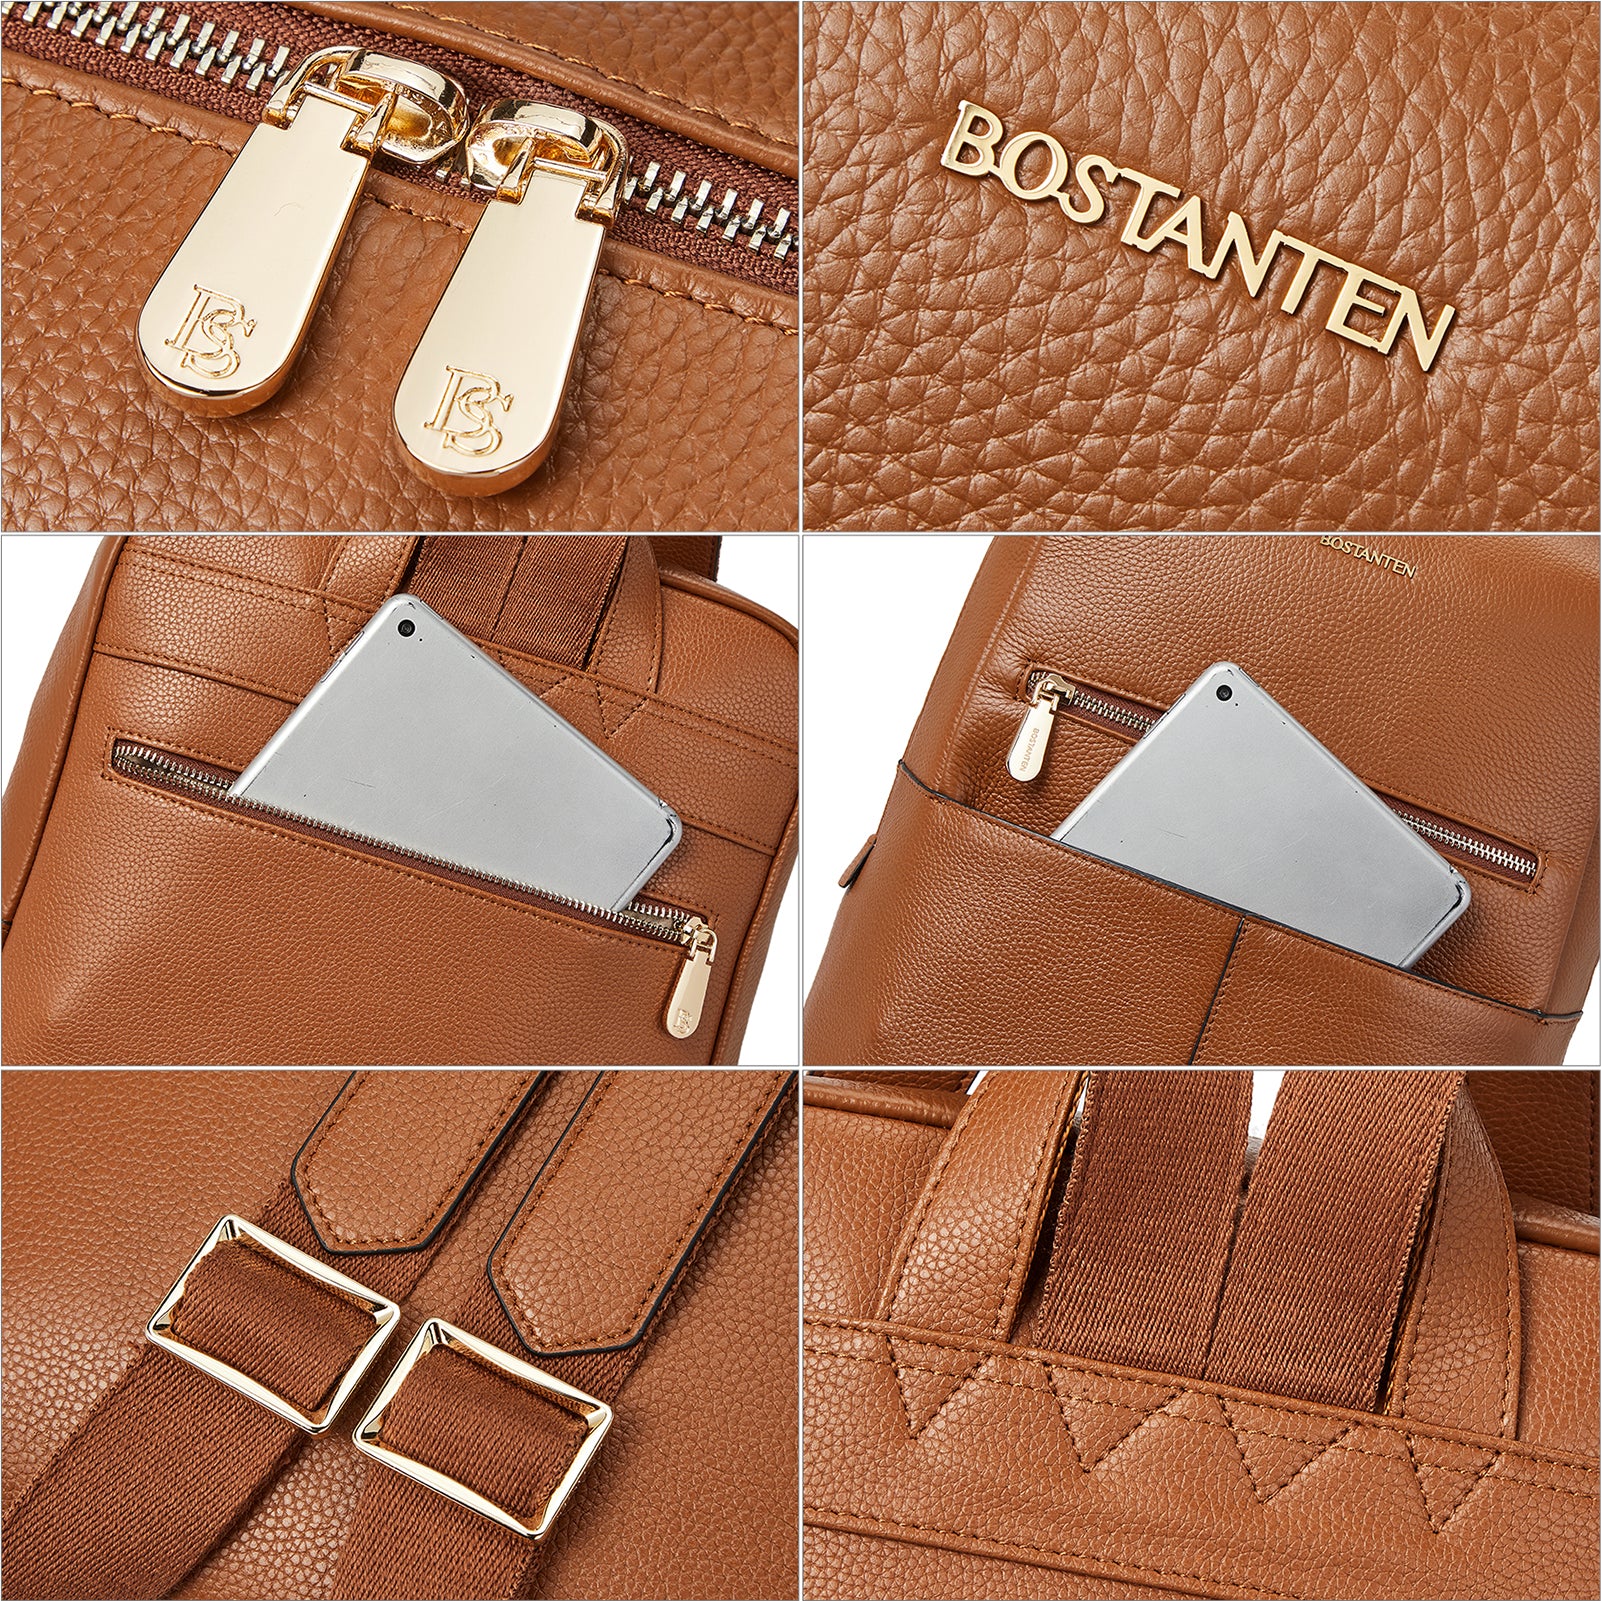 BOSTANTEN Leather Laptop Backpack for Women 15.6 inch Computer Bag